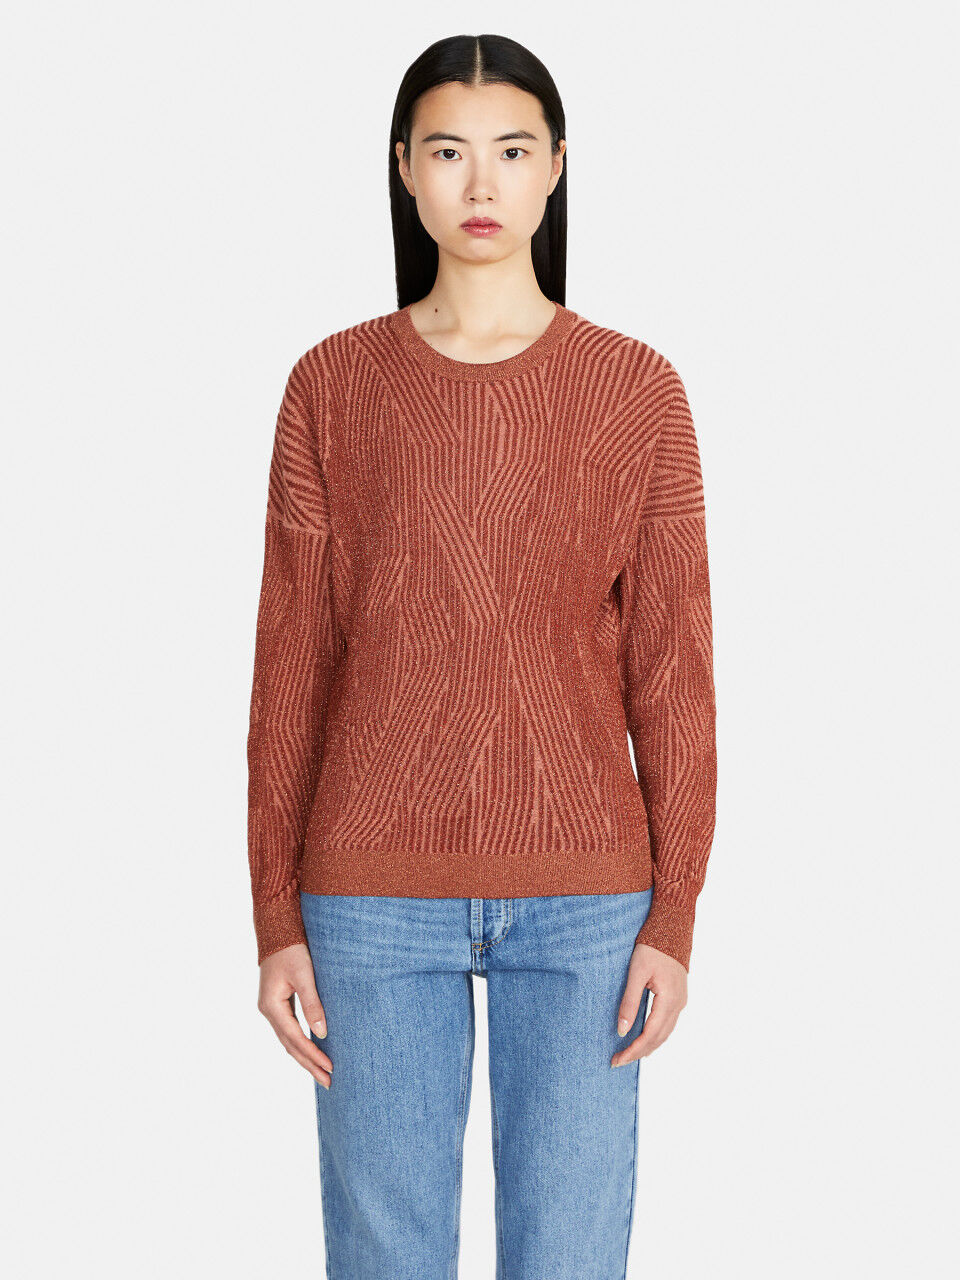 Multicolored sweater with lurex